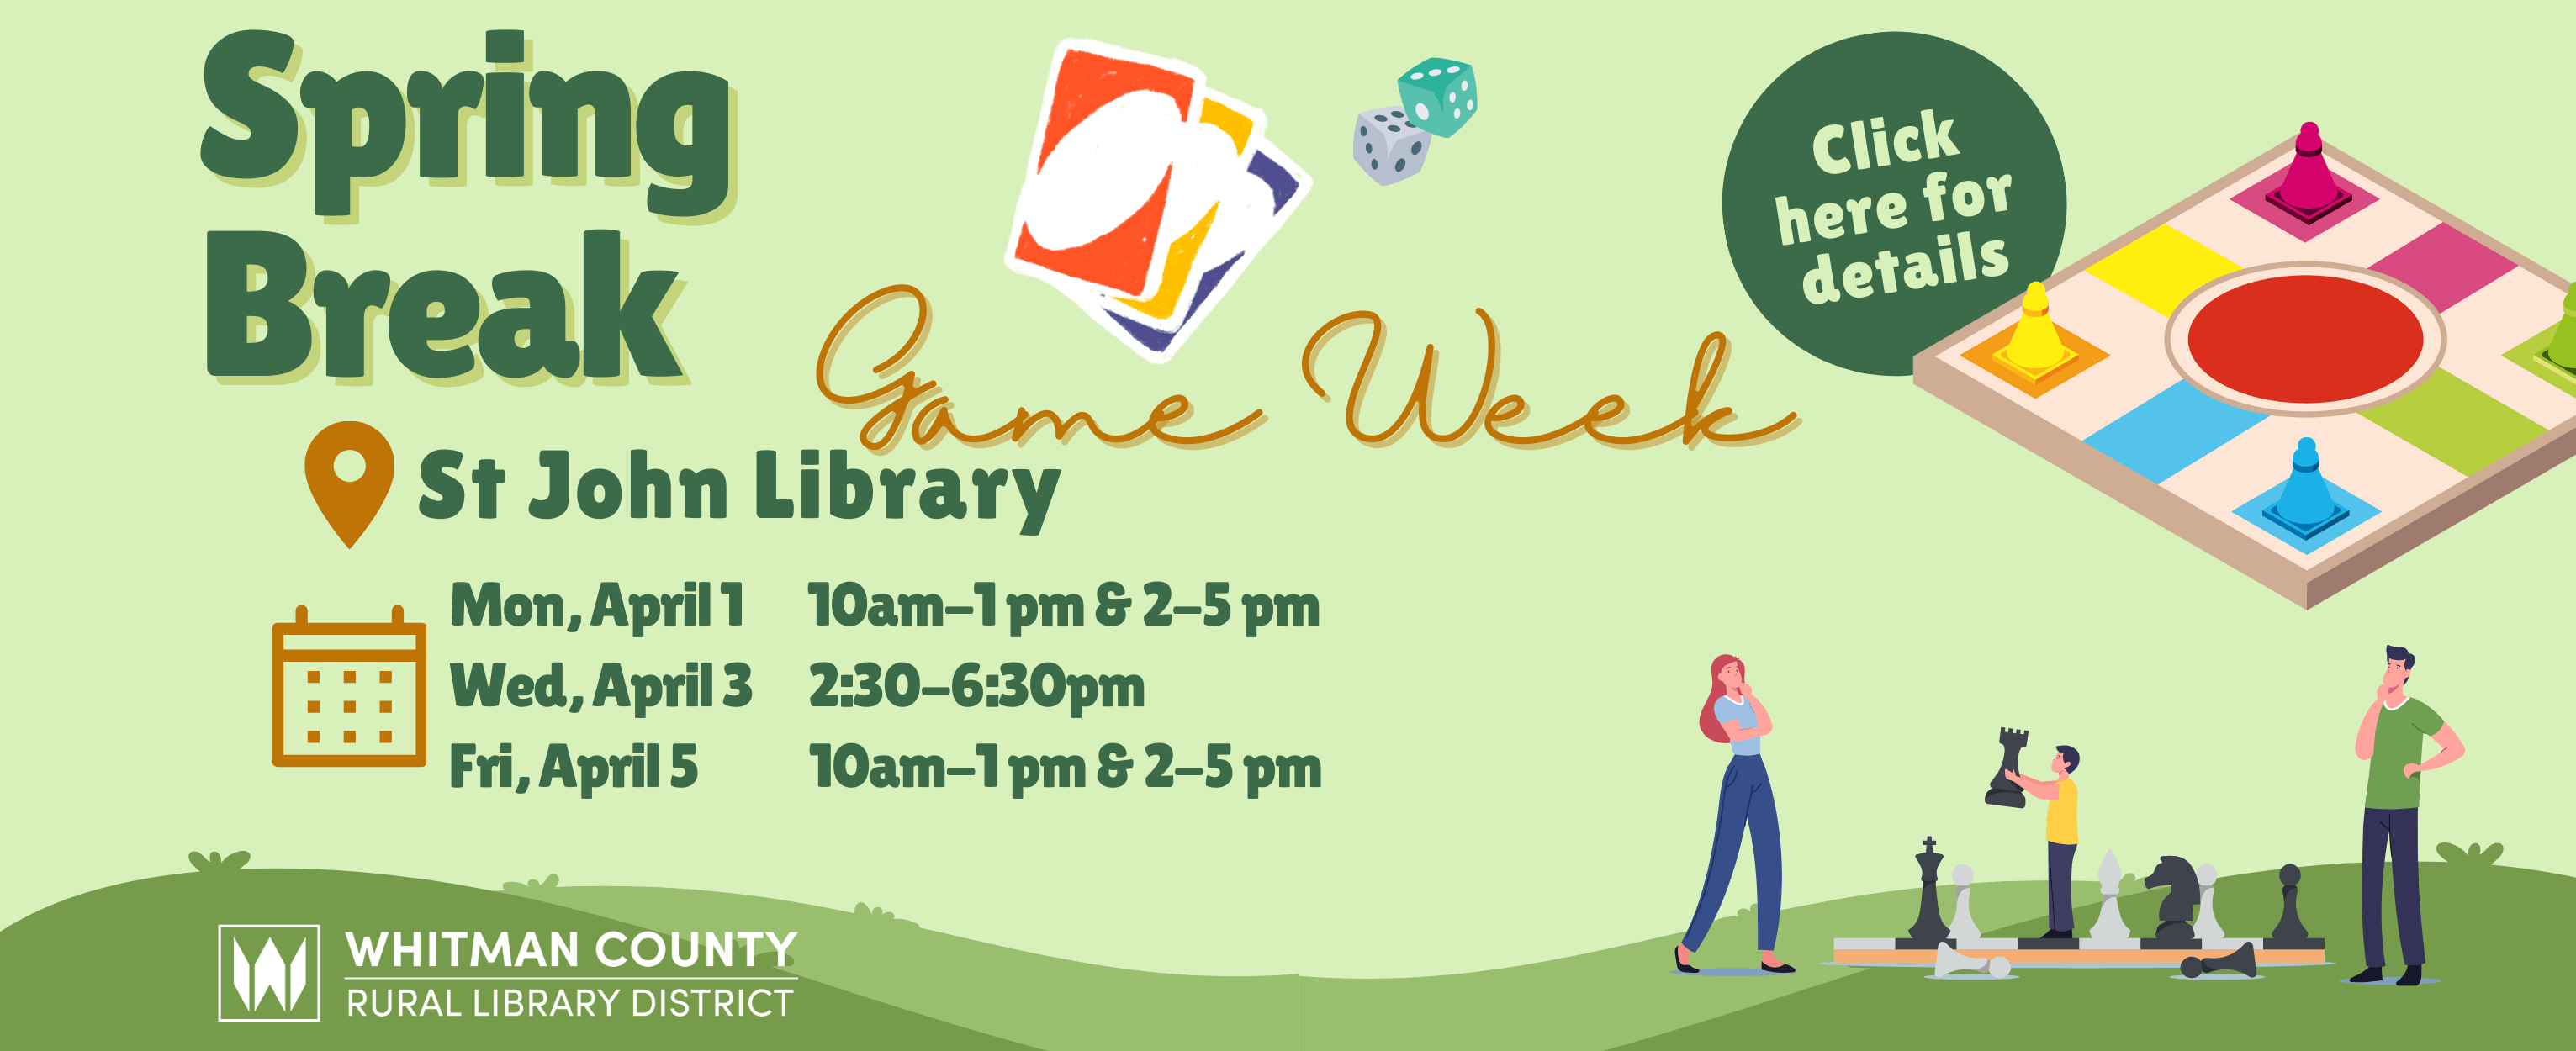 Join our St. John Library in celebrating Spring Break with GAME WEEK. Click here for details.